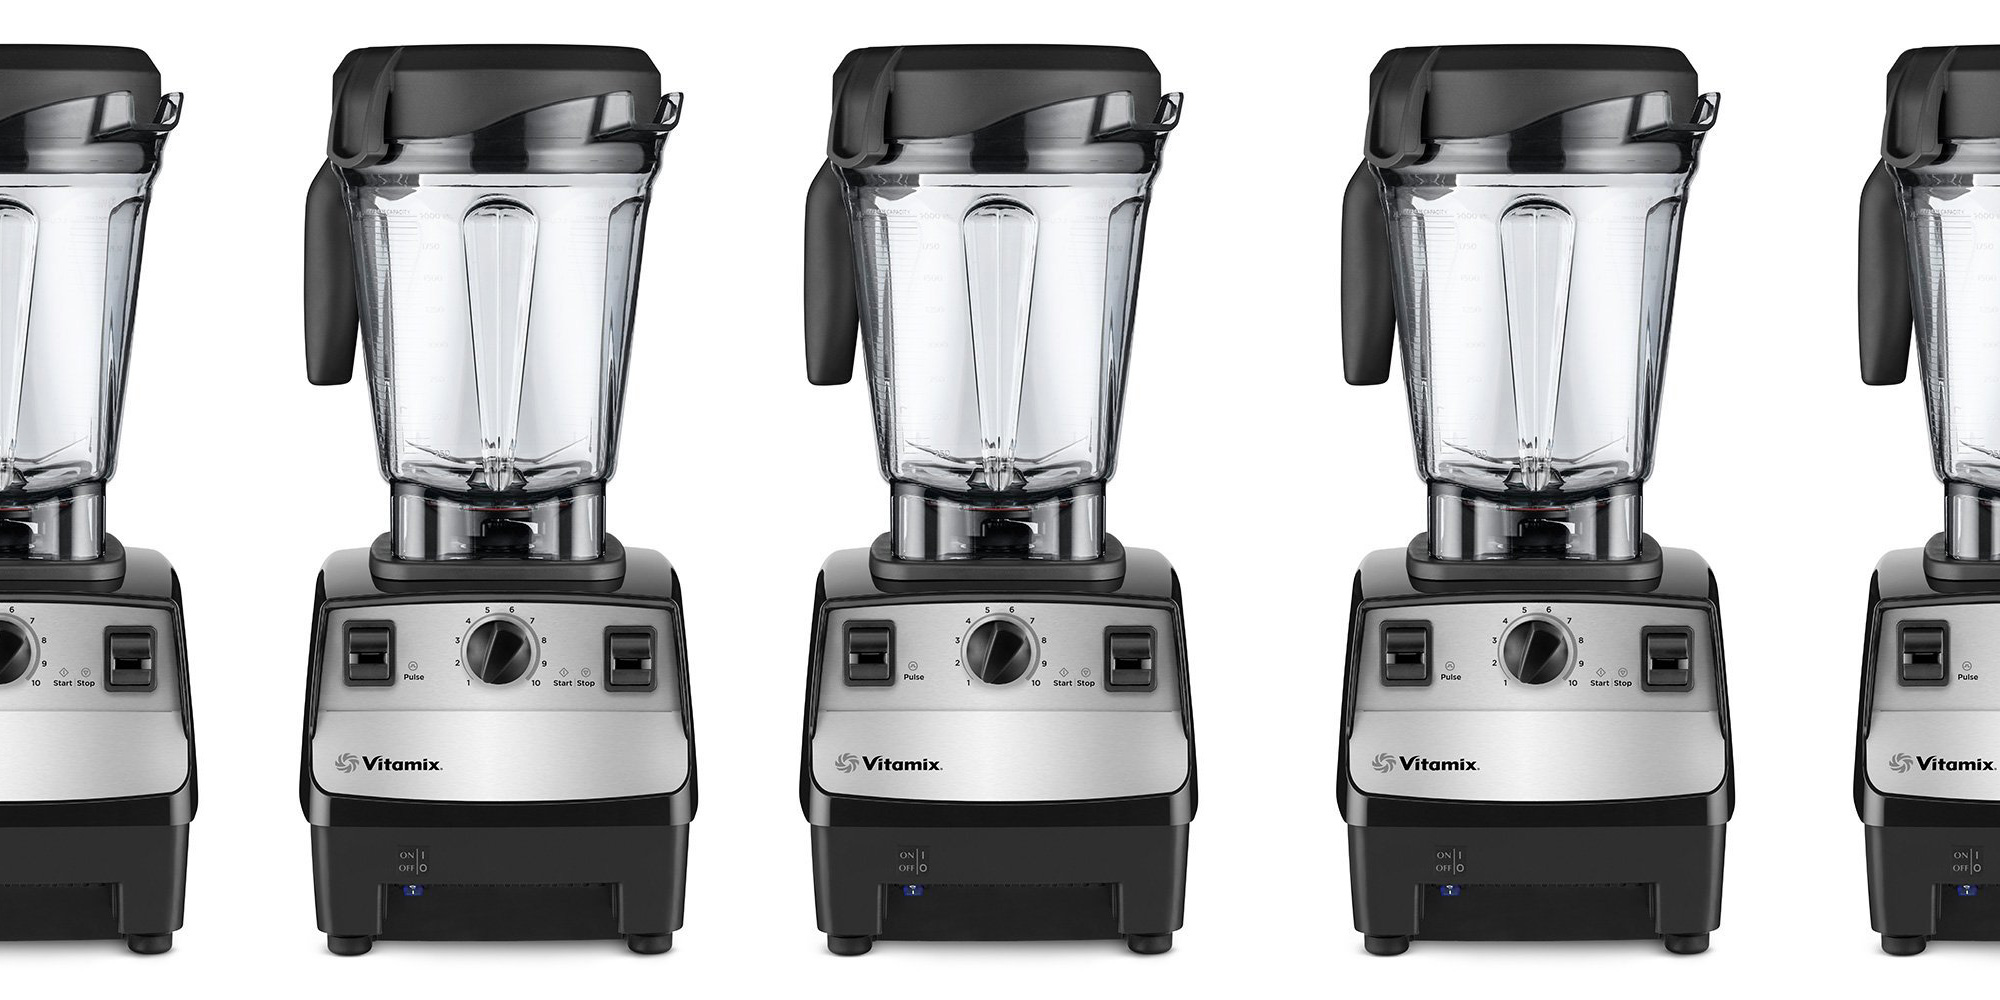 This Vitamix Blender Is on Sale for $260 Off—But Only for 2 Days